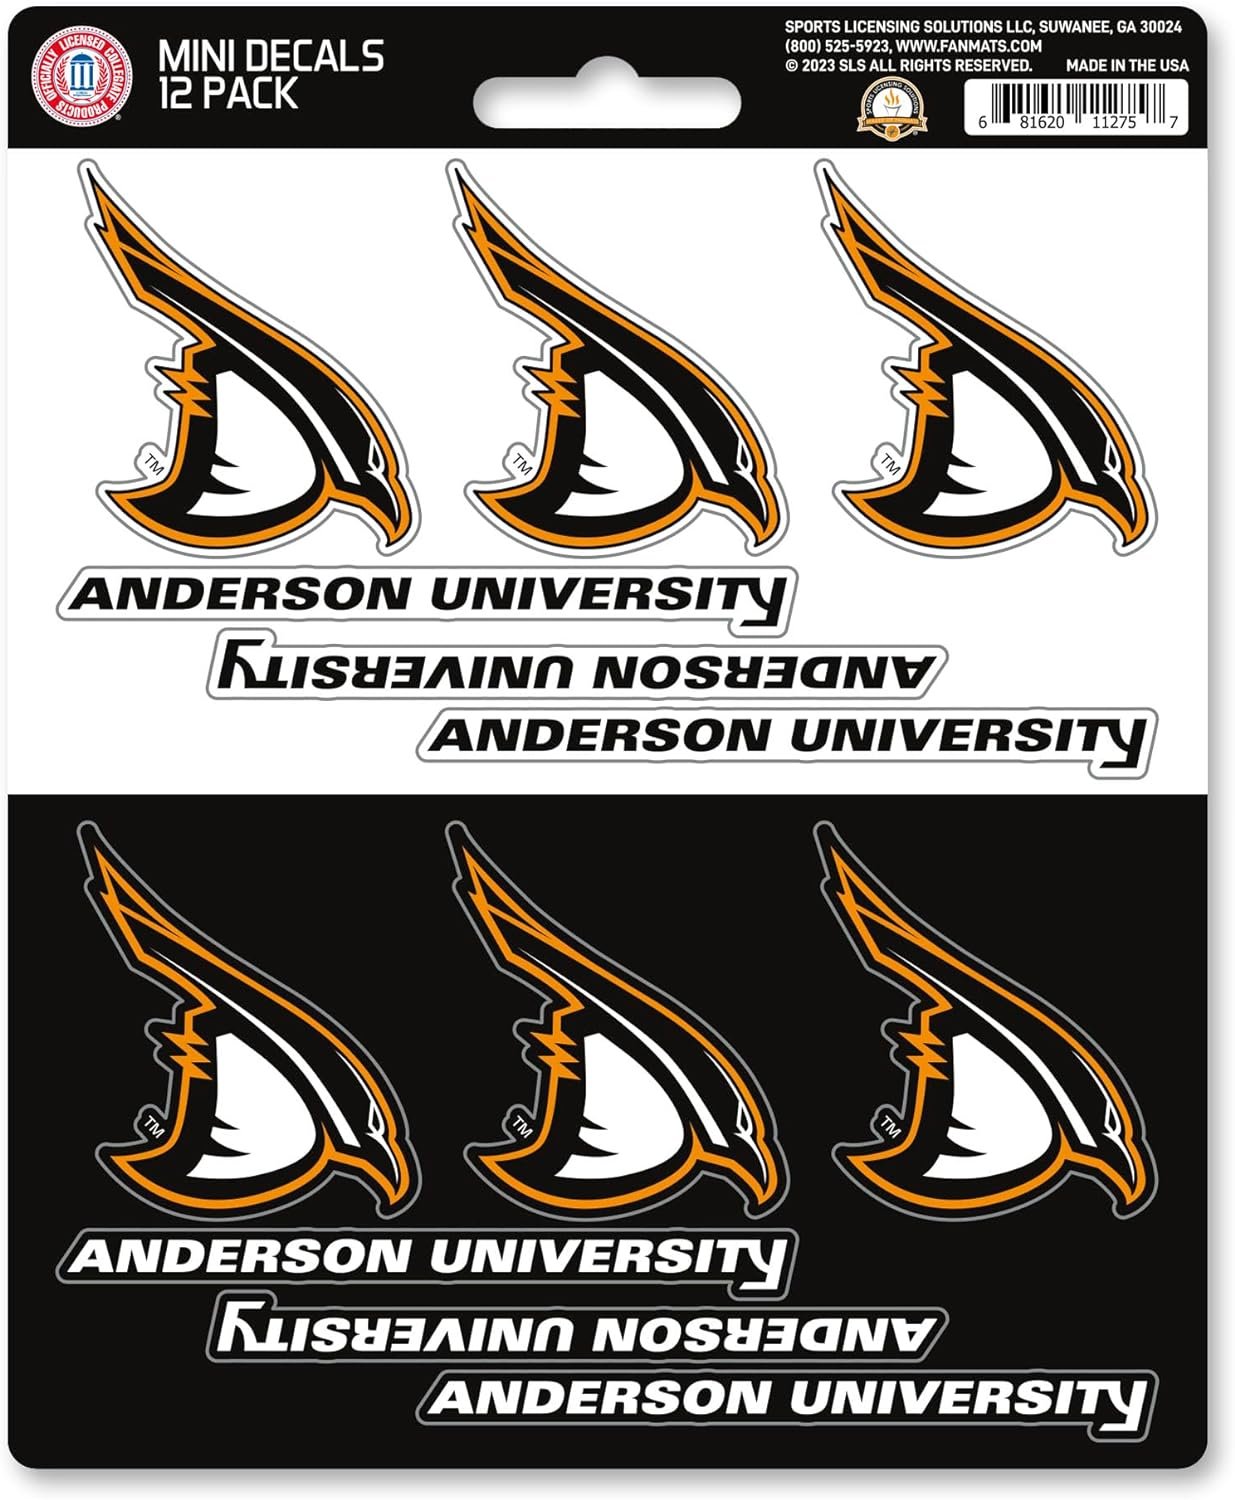 Anderson University Ravens 12-Piece Mini Decal Sticker Set, 5x6 Inch Sheet, Gift for football fans for any hard surfaces around home, automotive, personal items